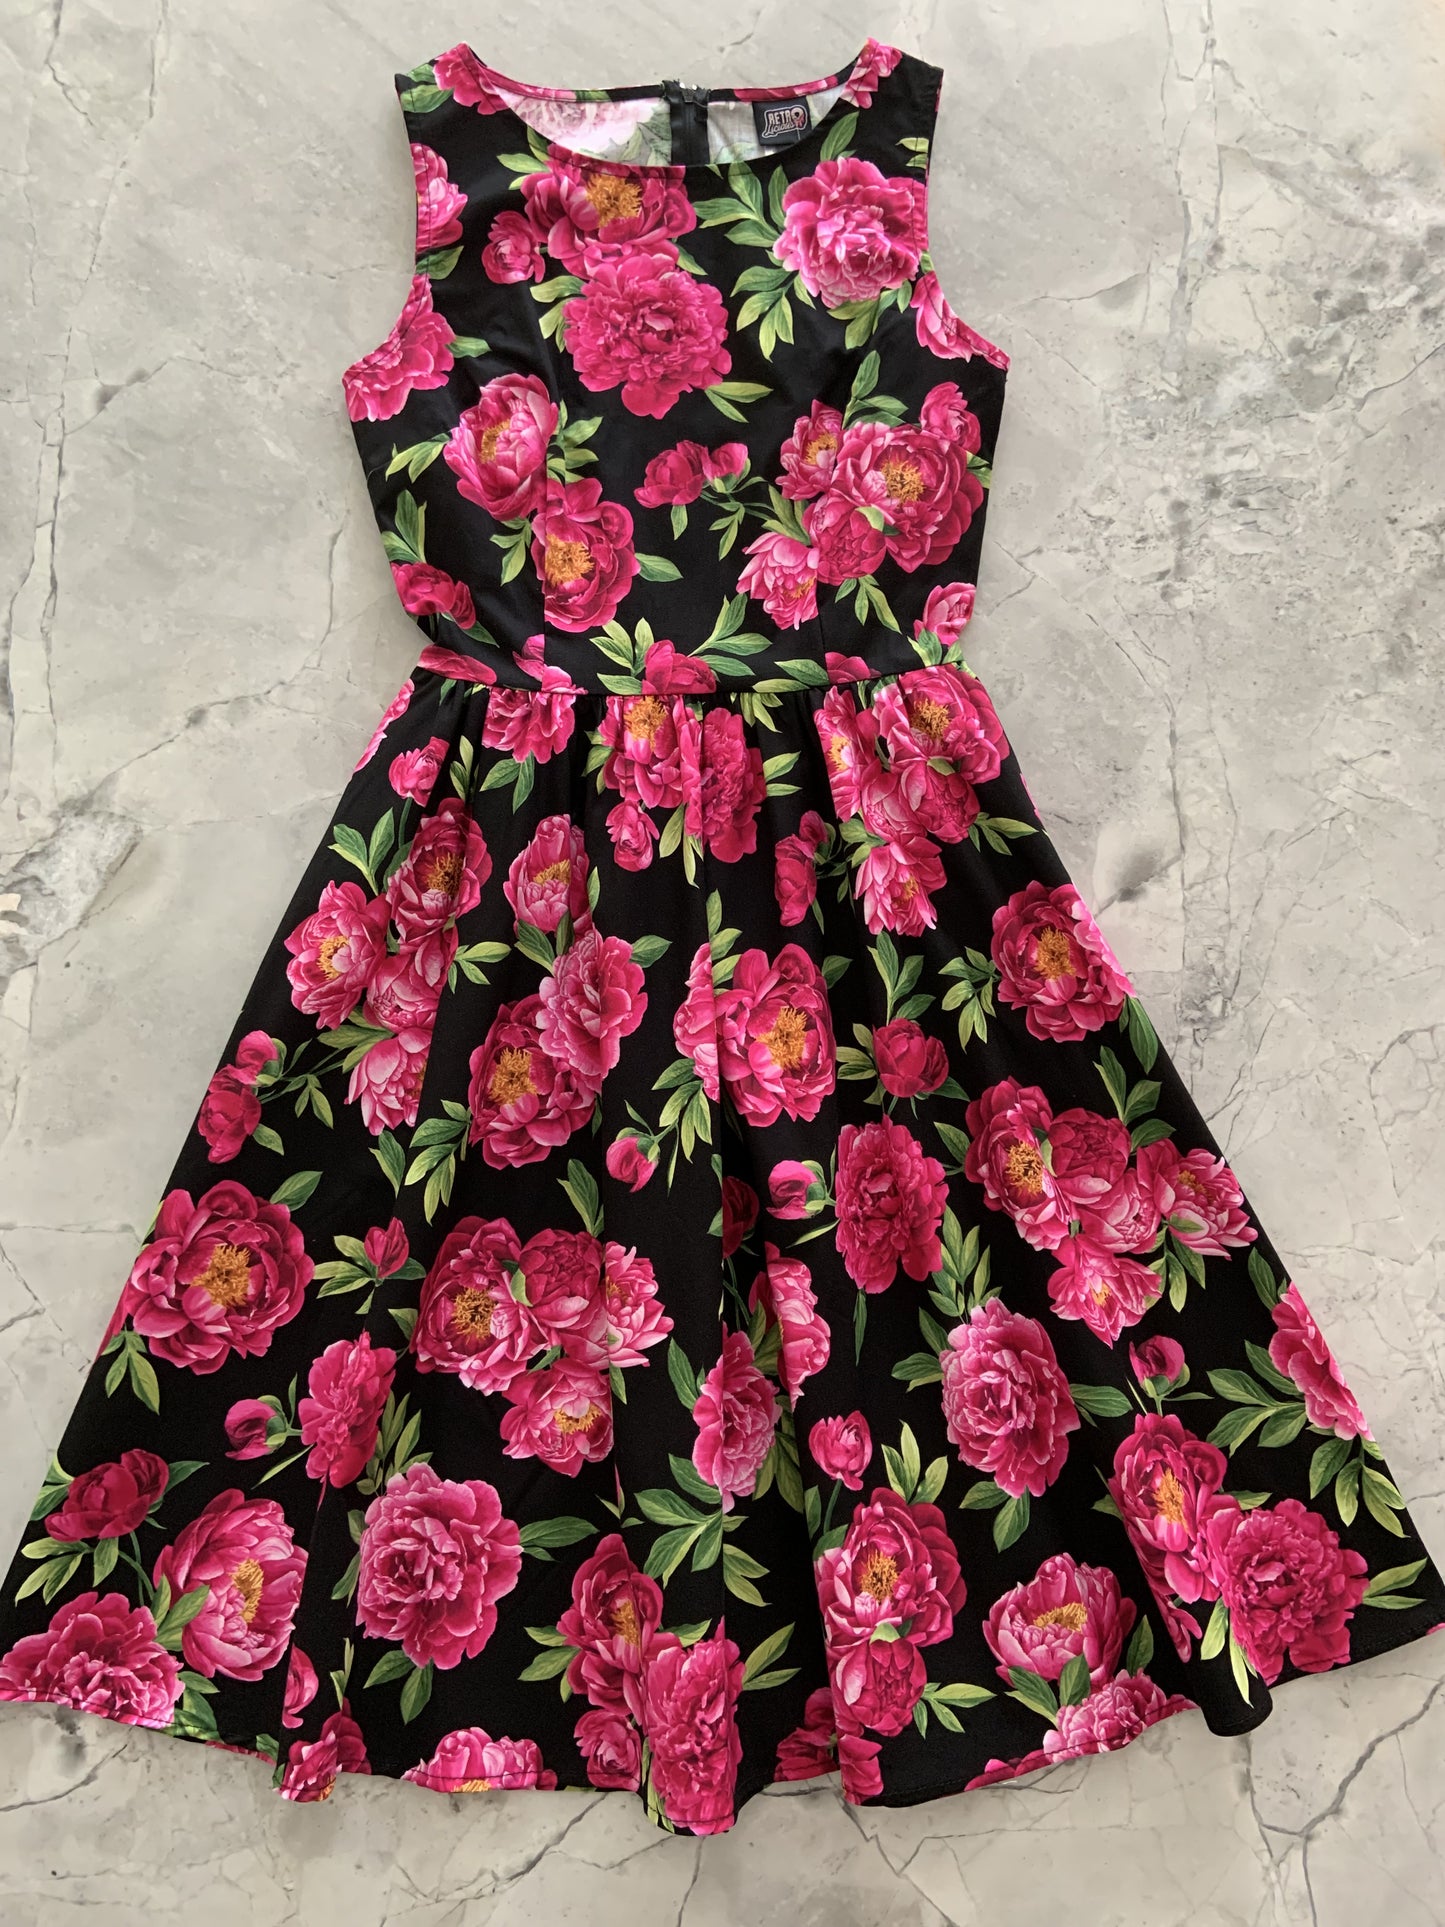 4860 Fuchsia Floral Vintage Dress - XS only, 1 left!